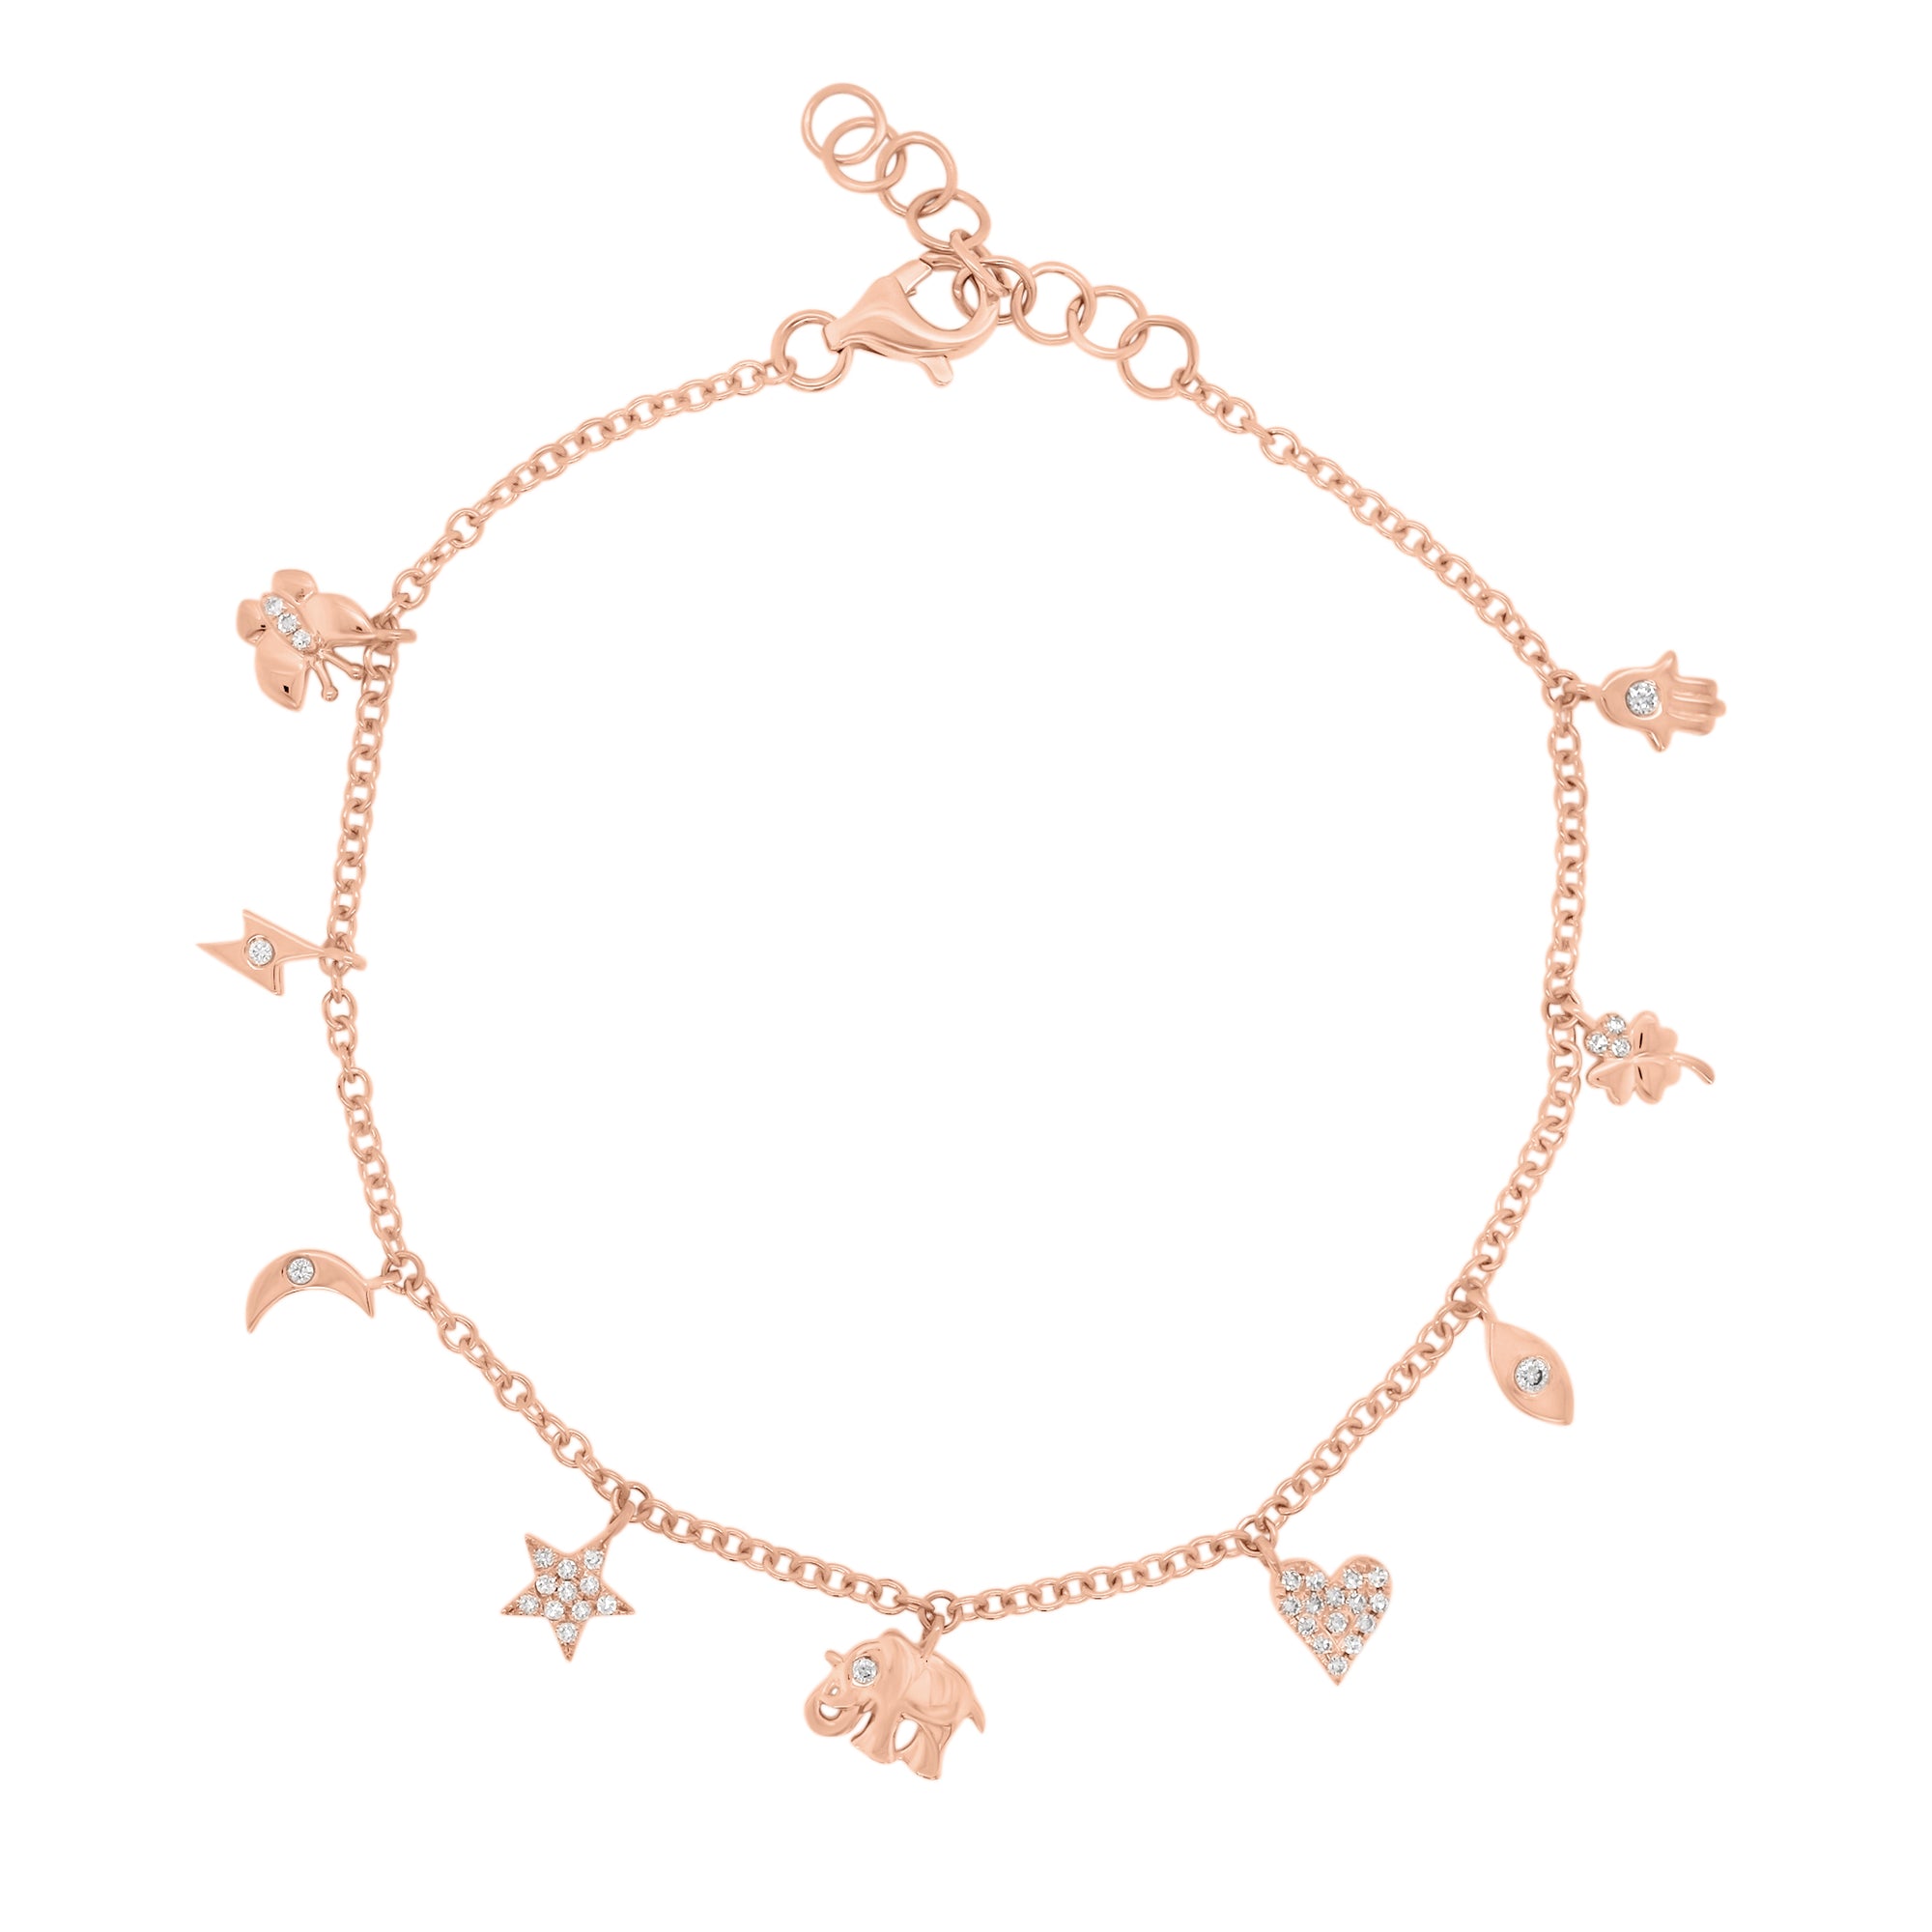 Diamond Lucky Charms Bracelet - 14K rose gold weighing 2.81 grams - 37 round diamonds totaling 0.10 carats